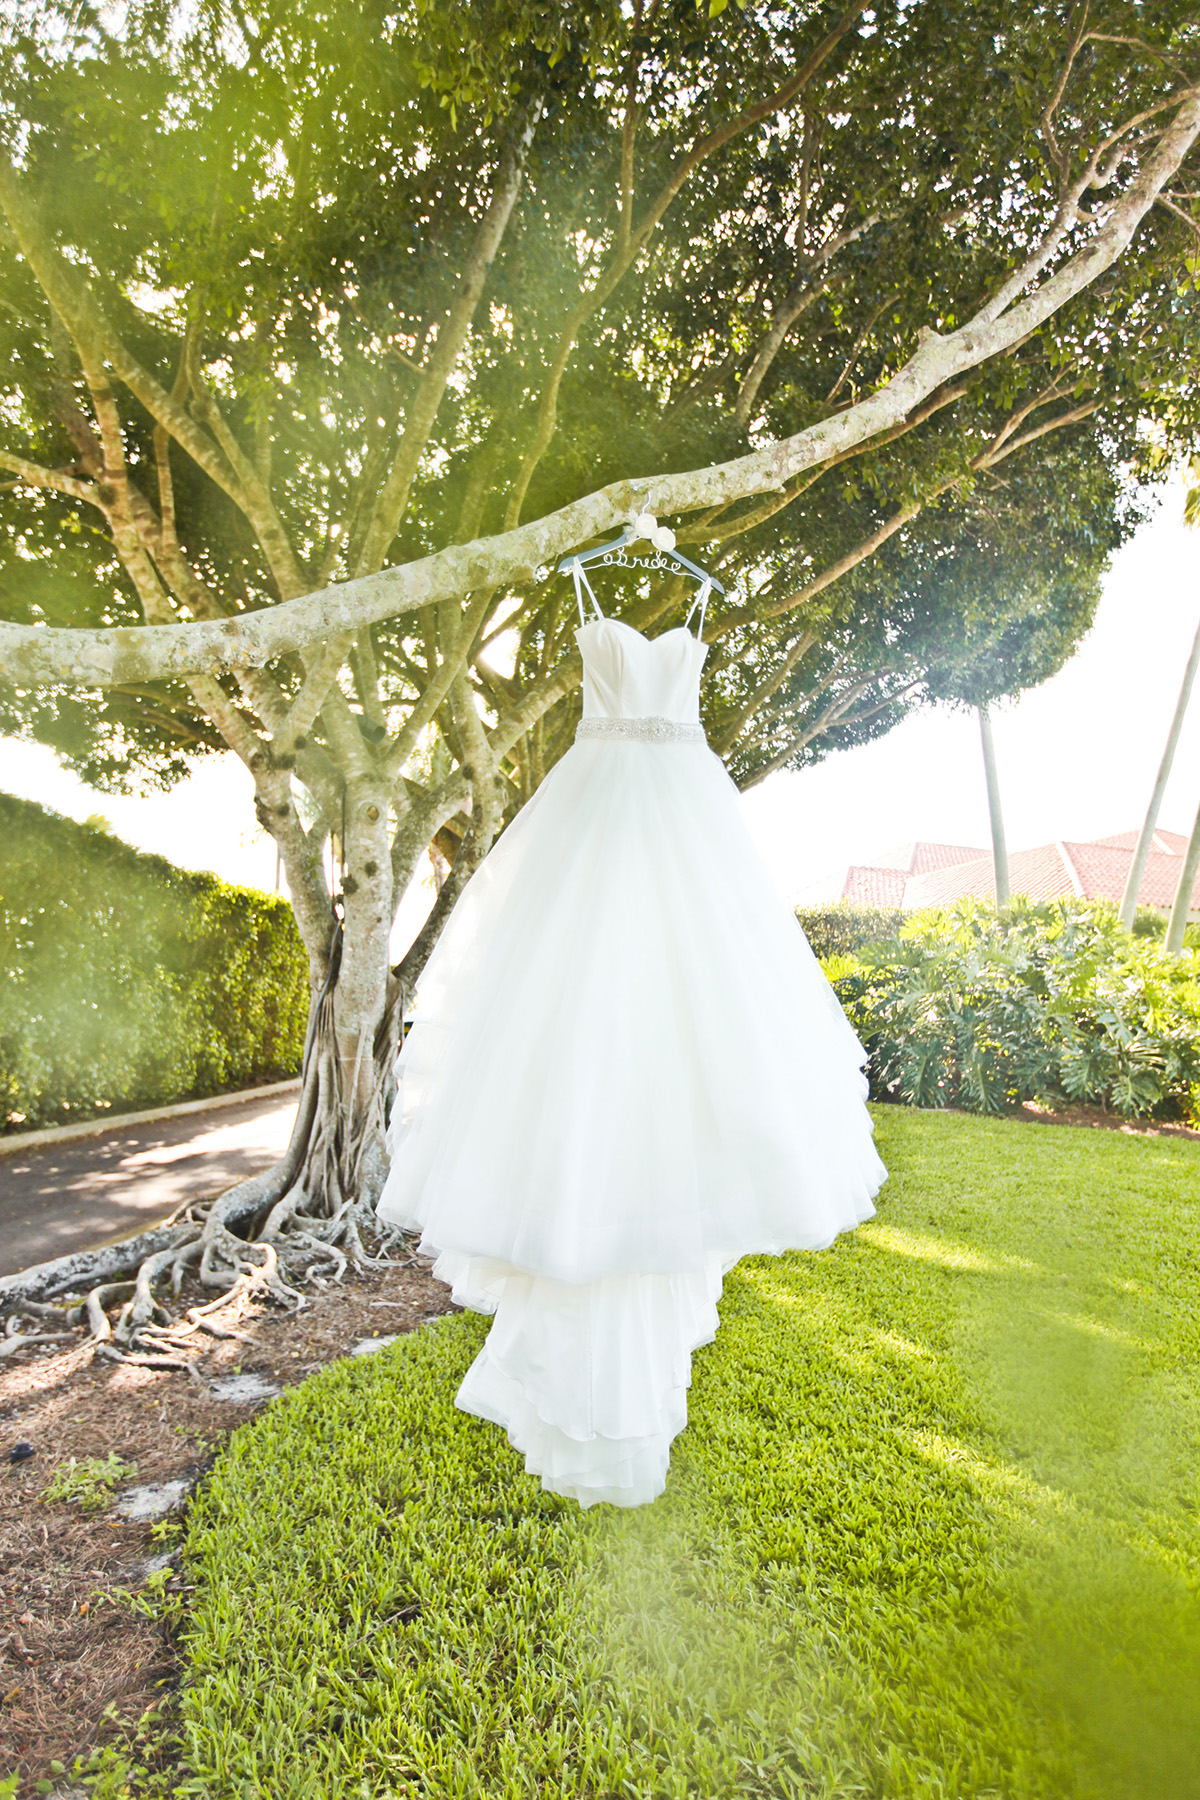 Elegant Bridal Gown | The Majestic Vision Wedding Planning | Breakers West in Palm Beach, FL | www.themajesticvision.com | Krystal Zaskey Photography